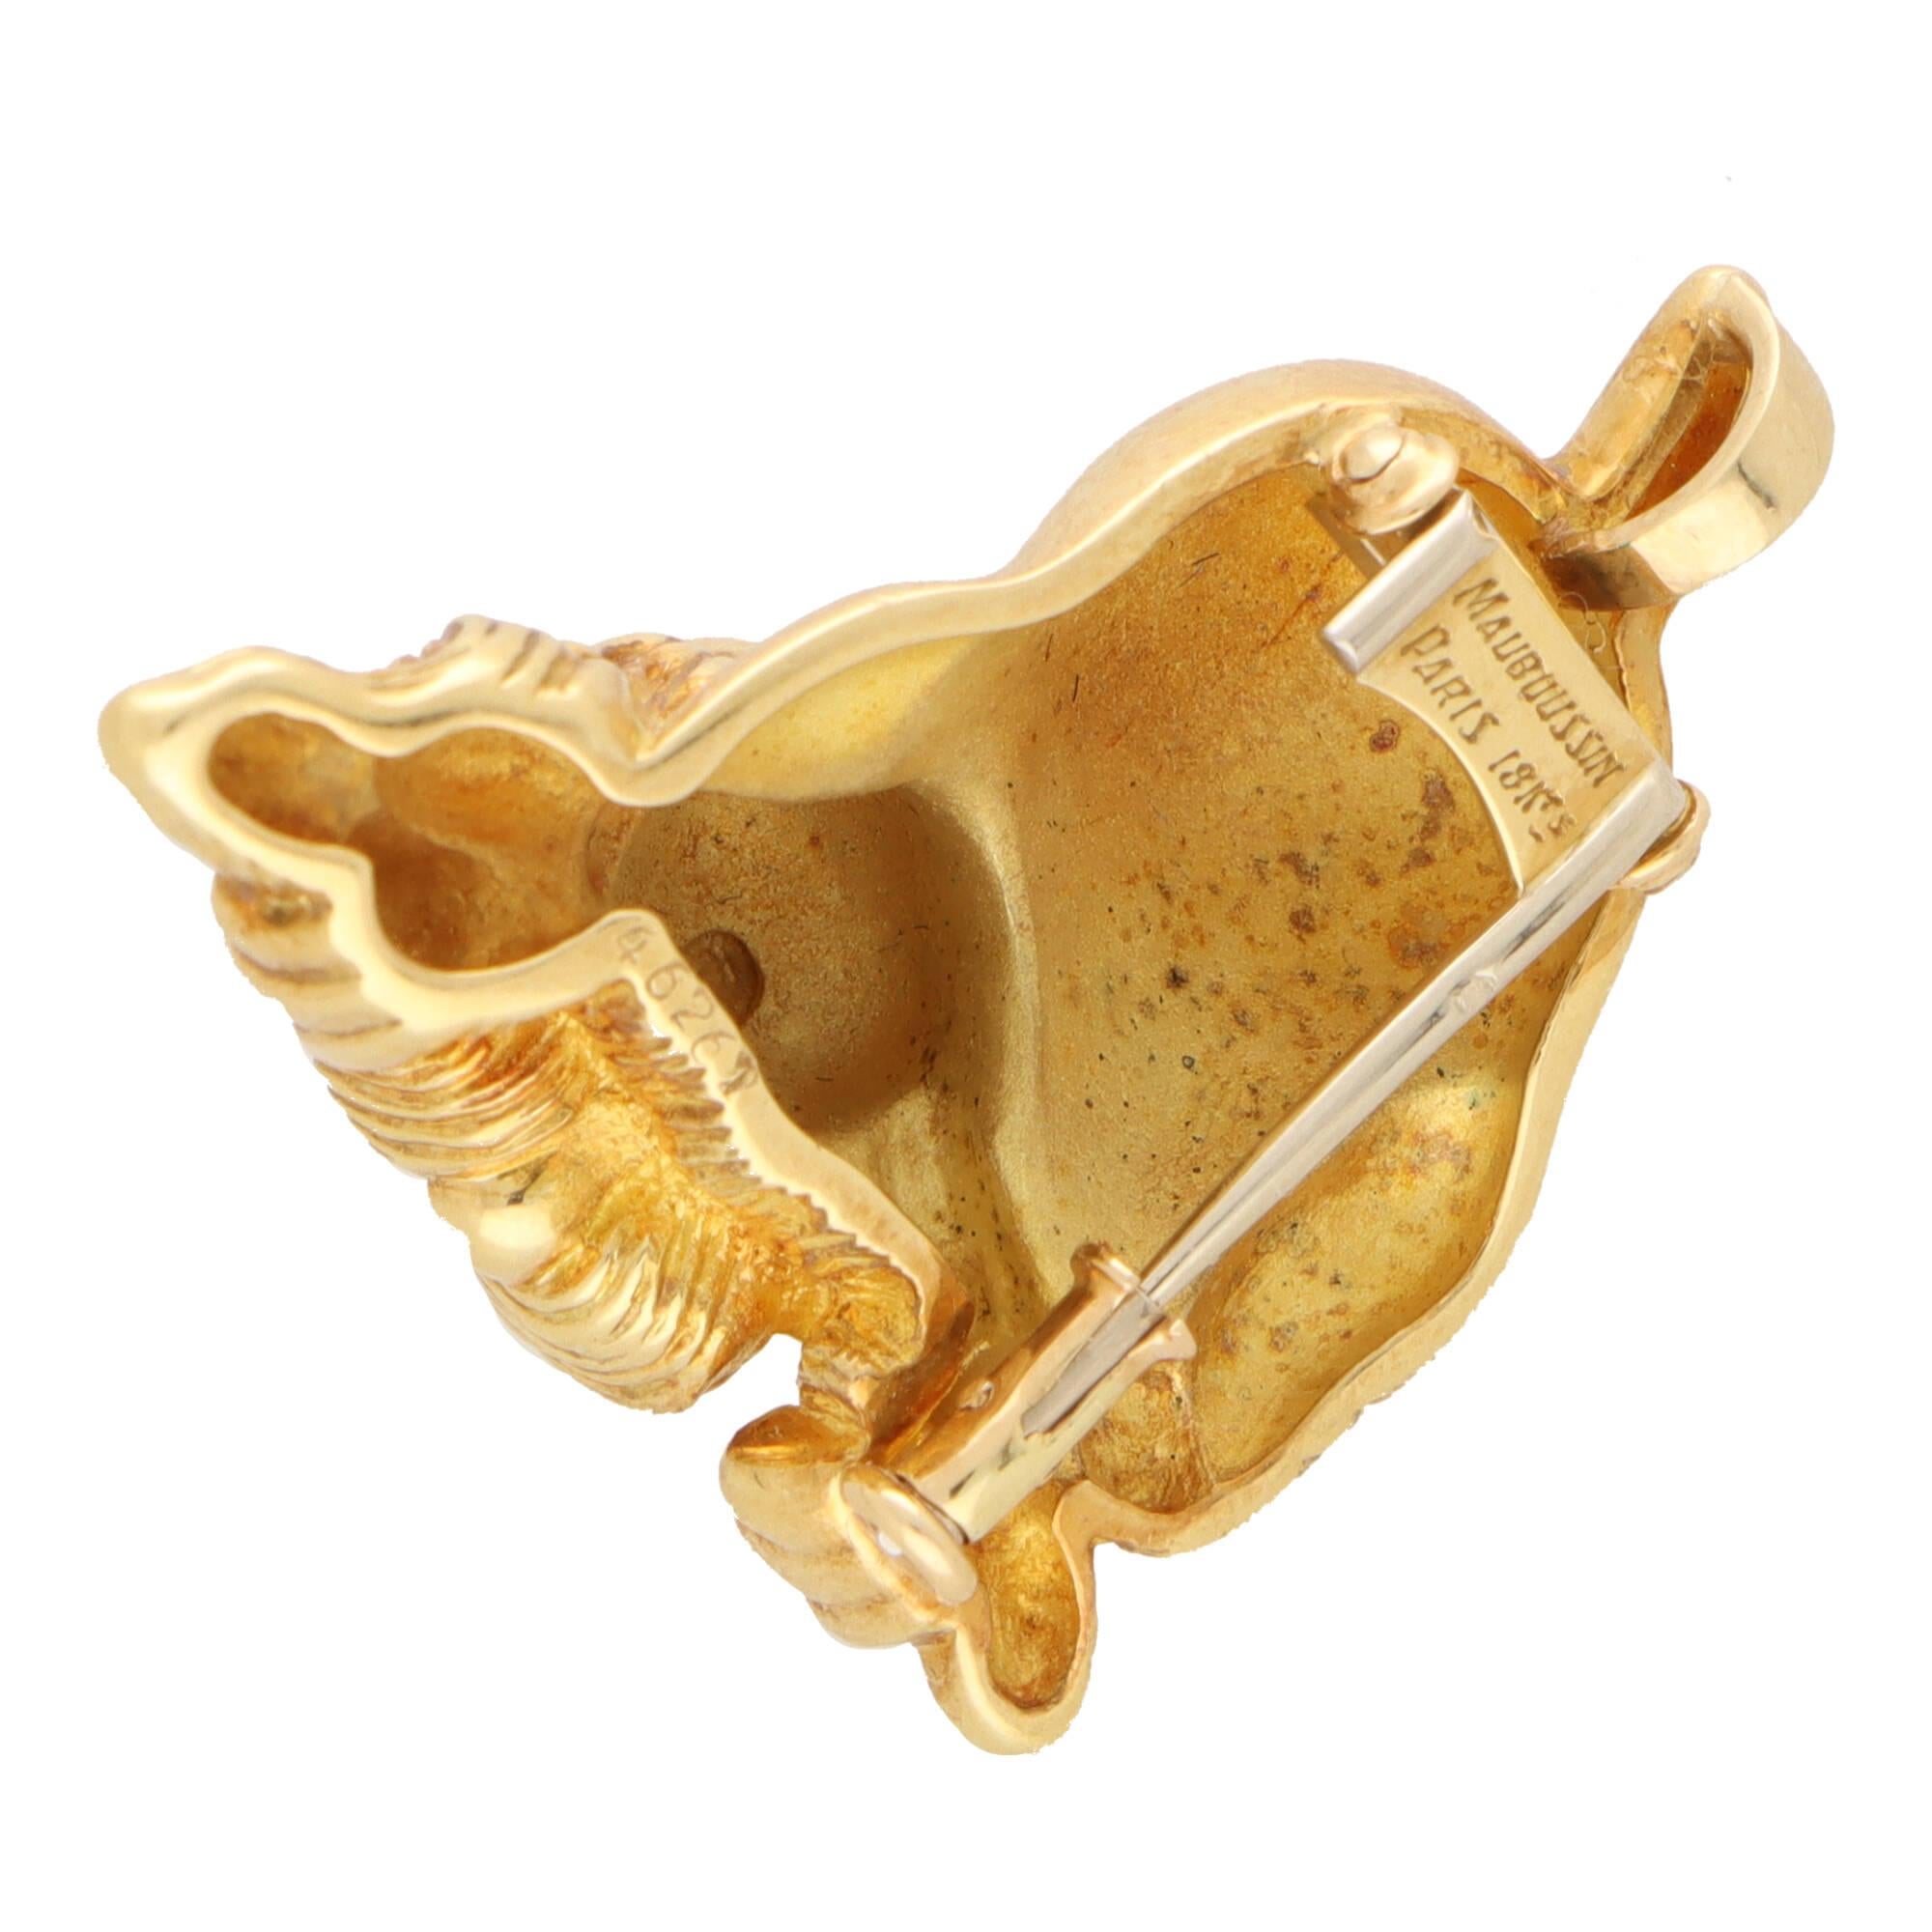 A beautiful vintage Mauboussin sapphire eyed dog brooch set in 18k yellow gold.

The brooch depicts a playing dog with its tail up in the air. The dogs body has been beautifully crafted with hand engraved detailing around the face and paws. Lastly